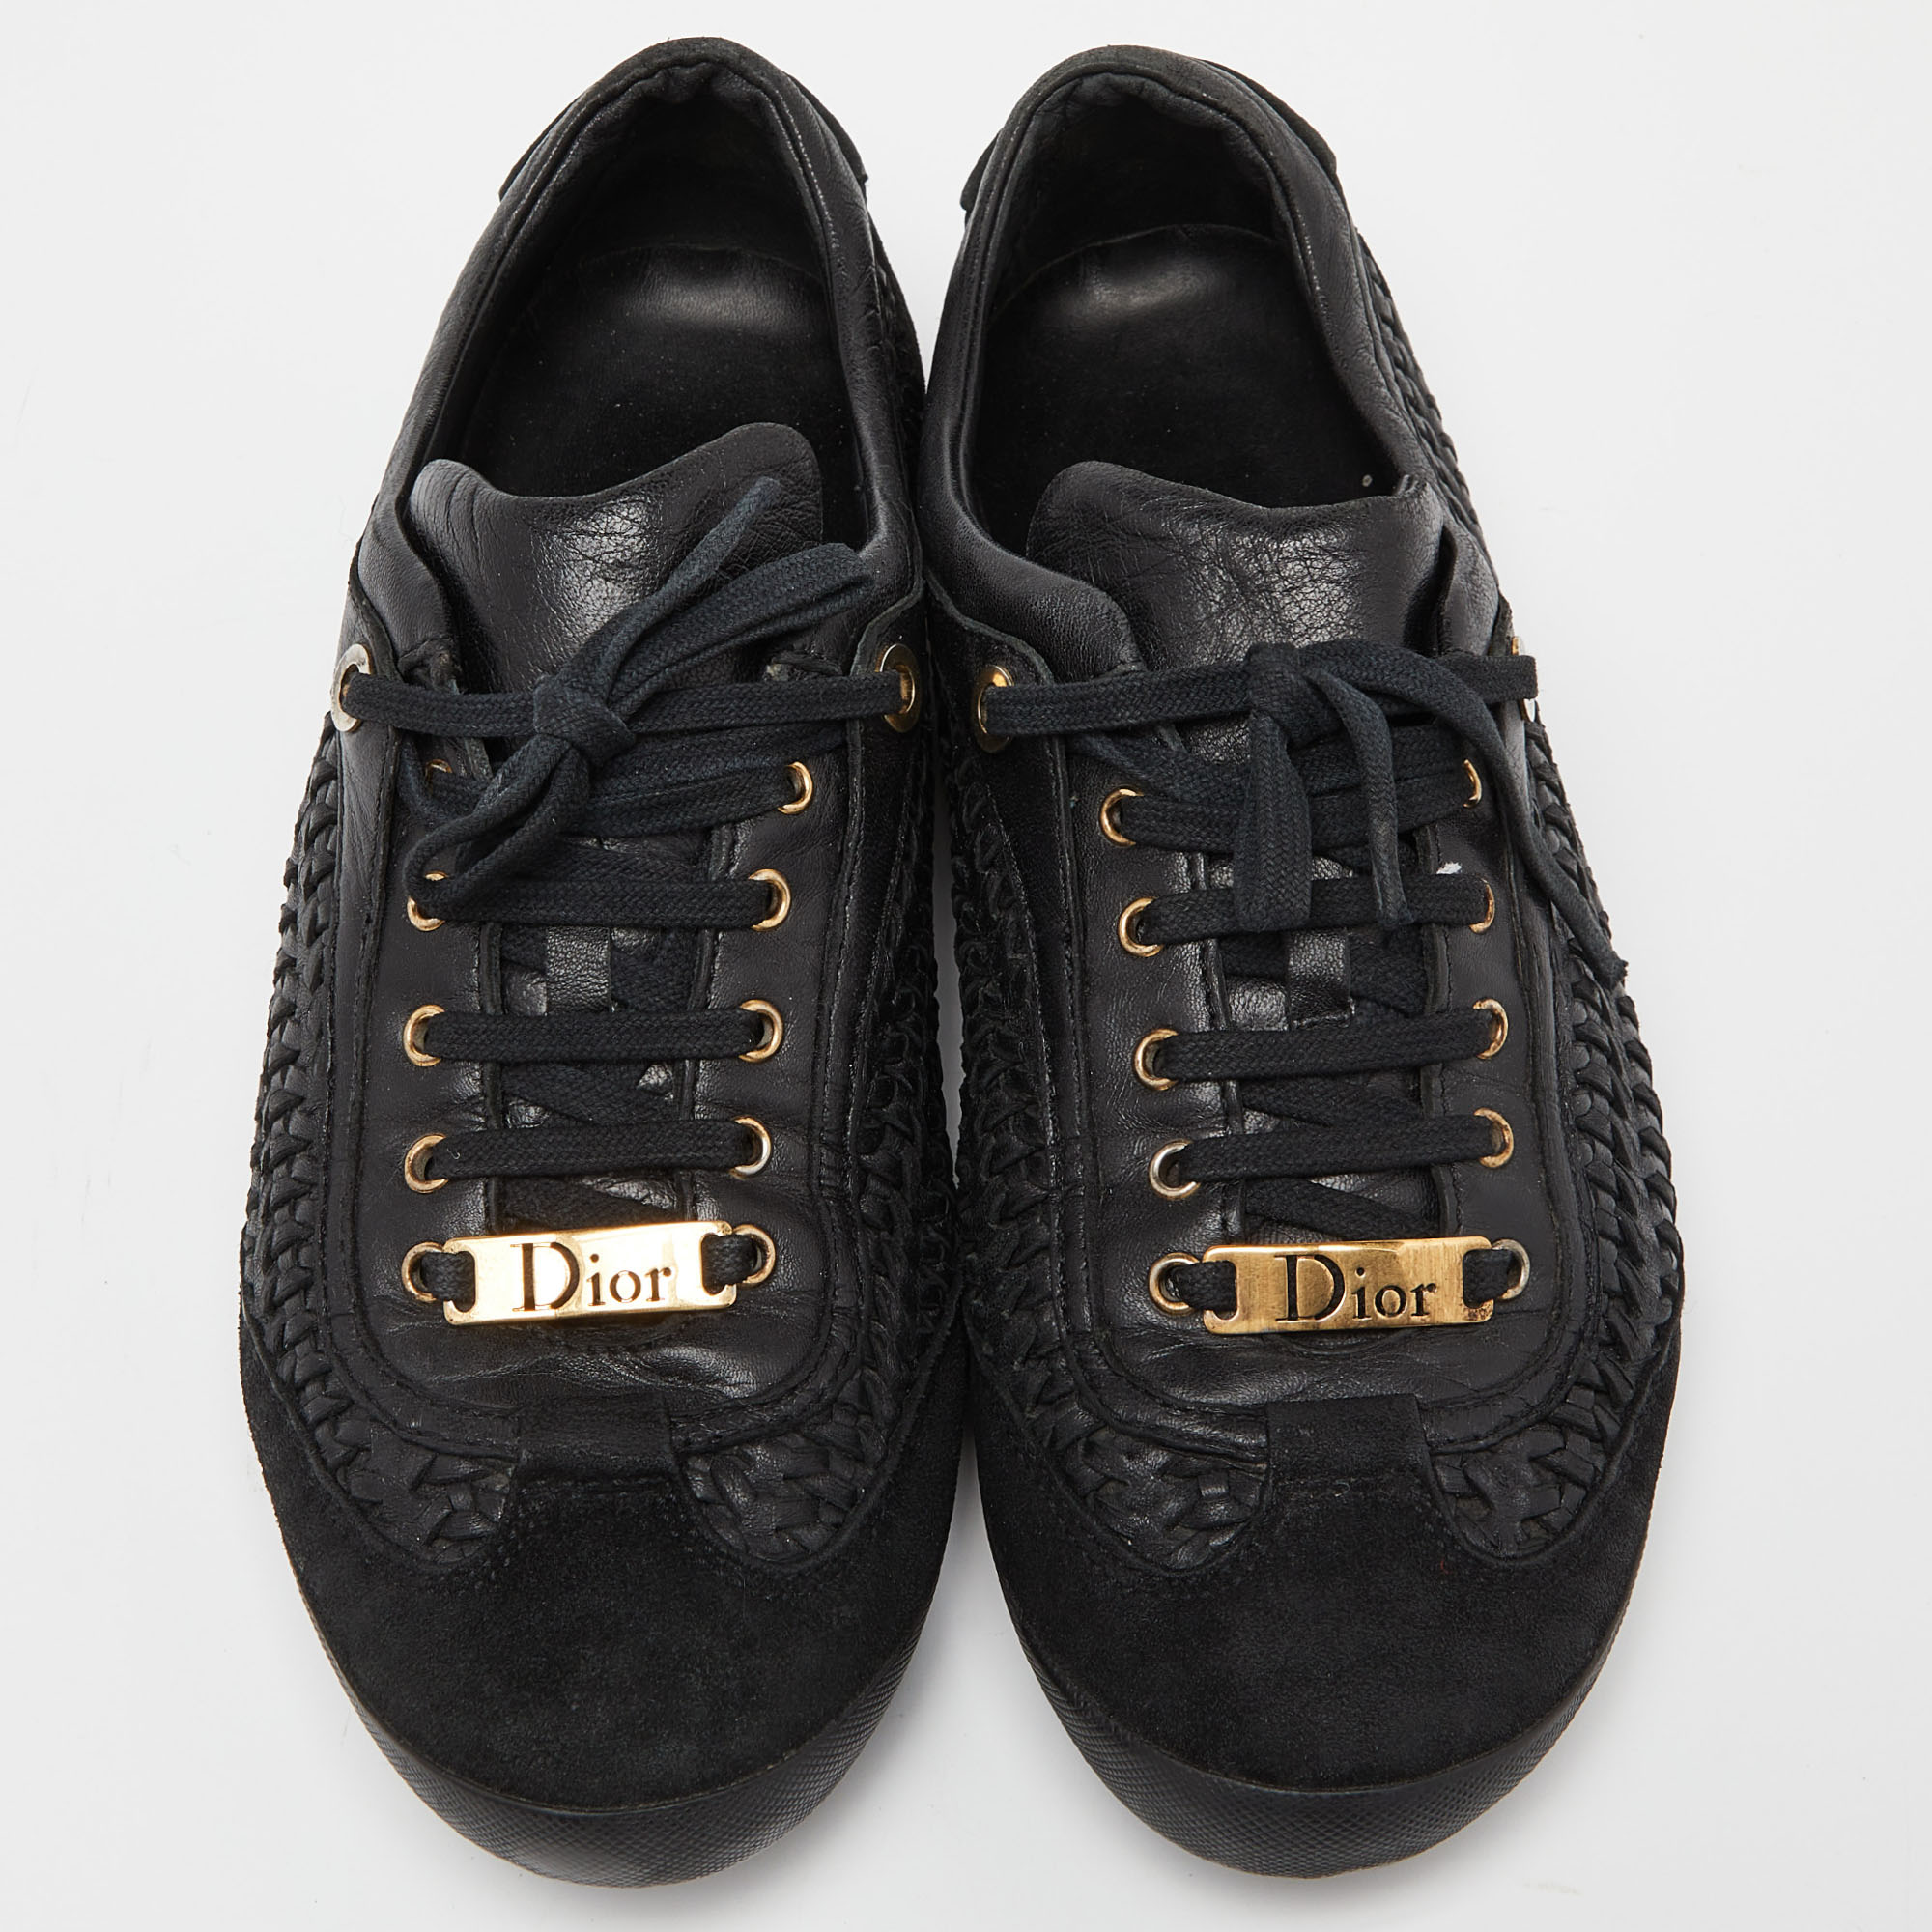 Dior Black Suede And Woven Leather Lace Up Sneakers Size 37